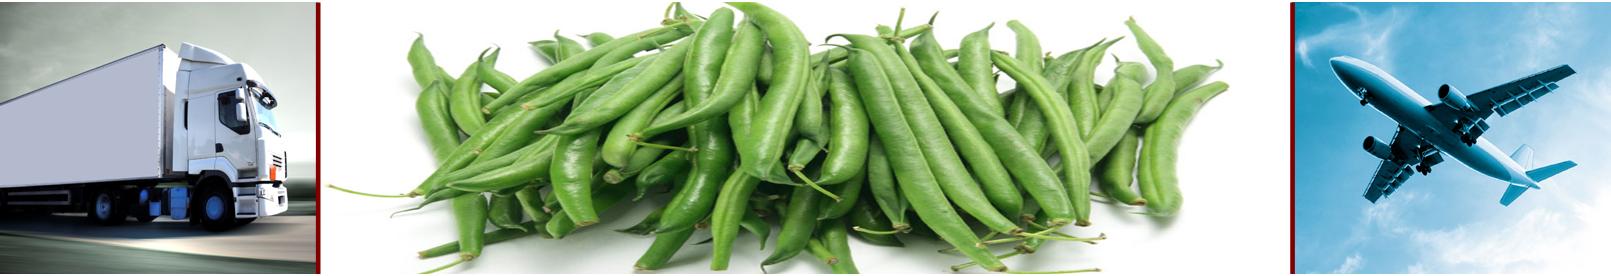 Frech Beans varieties from Royal seed suitable for export market